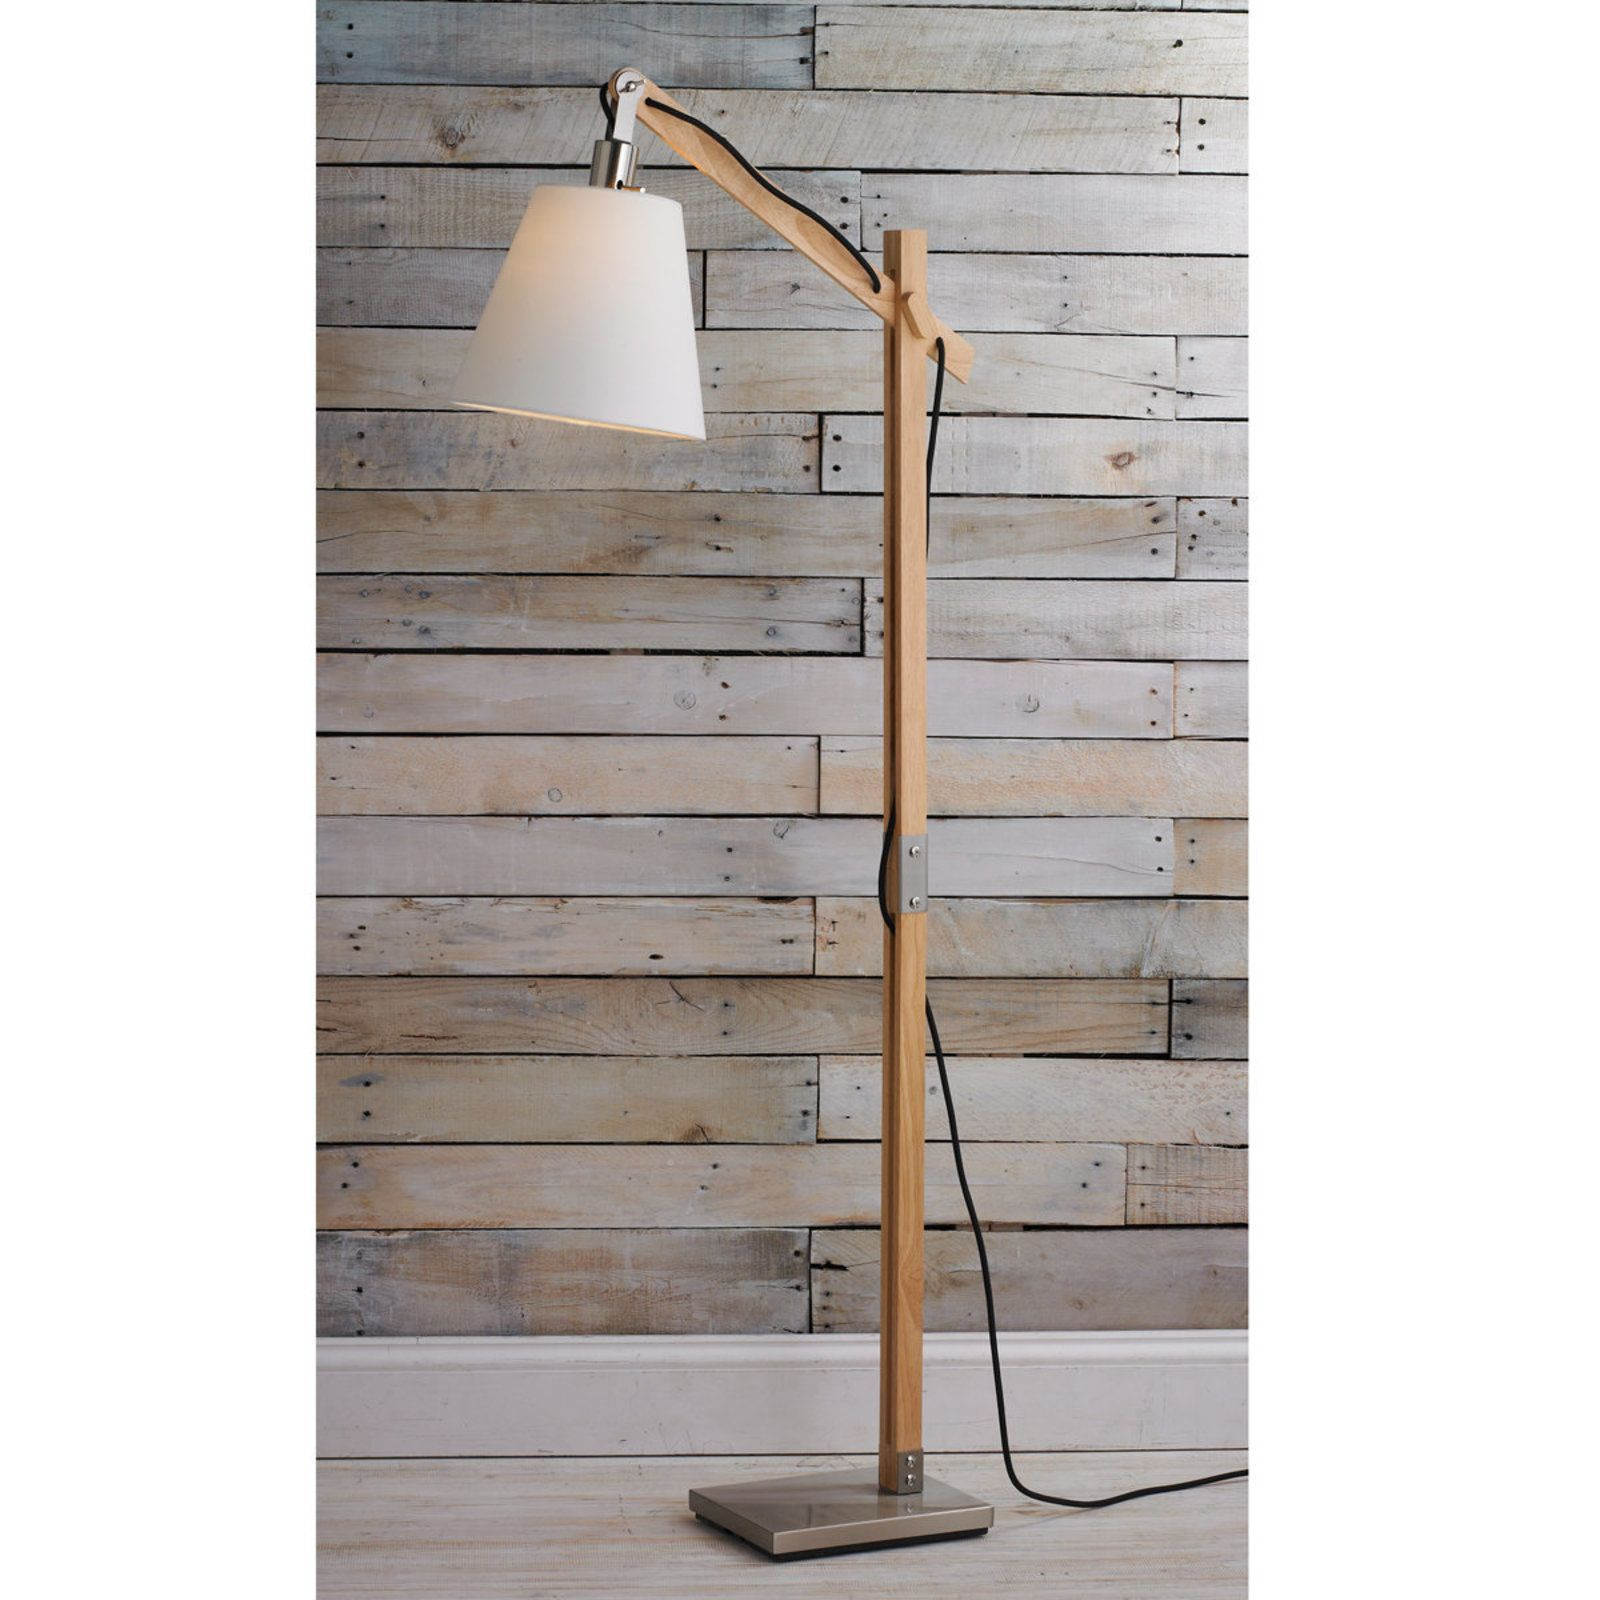 Modern Rustic Wood Arc Floor Lamp In 2019 Rustic Floor intended for size 1600 X 1600